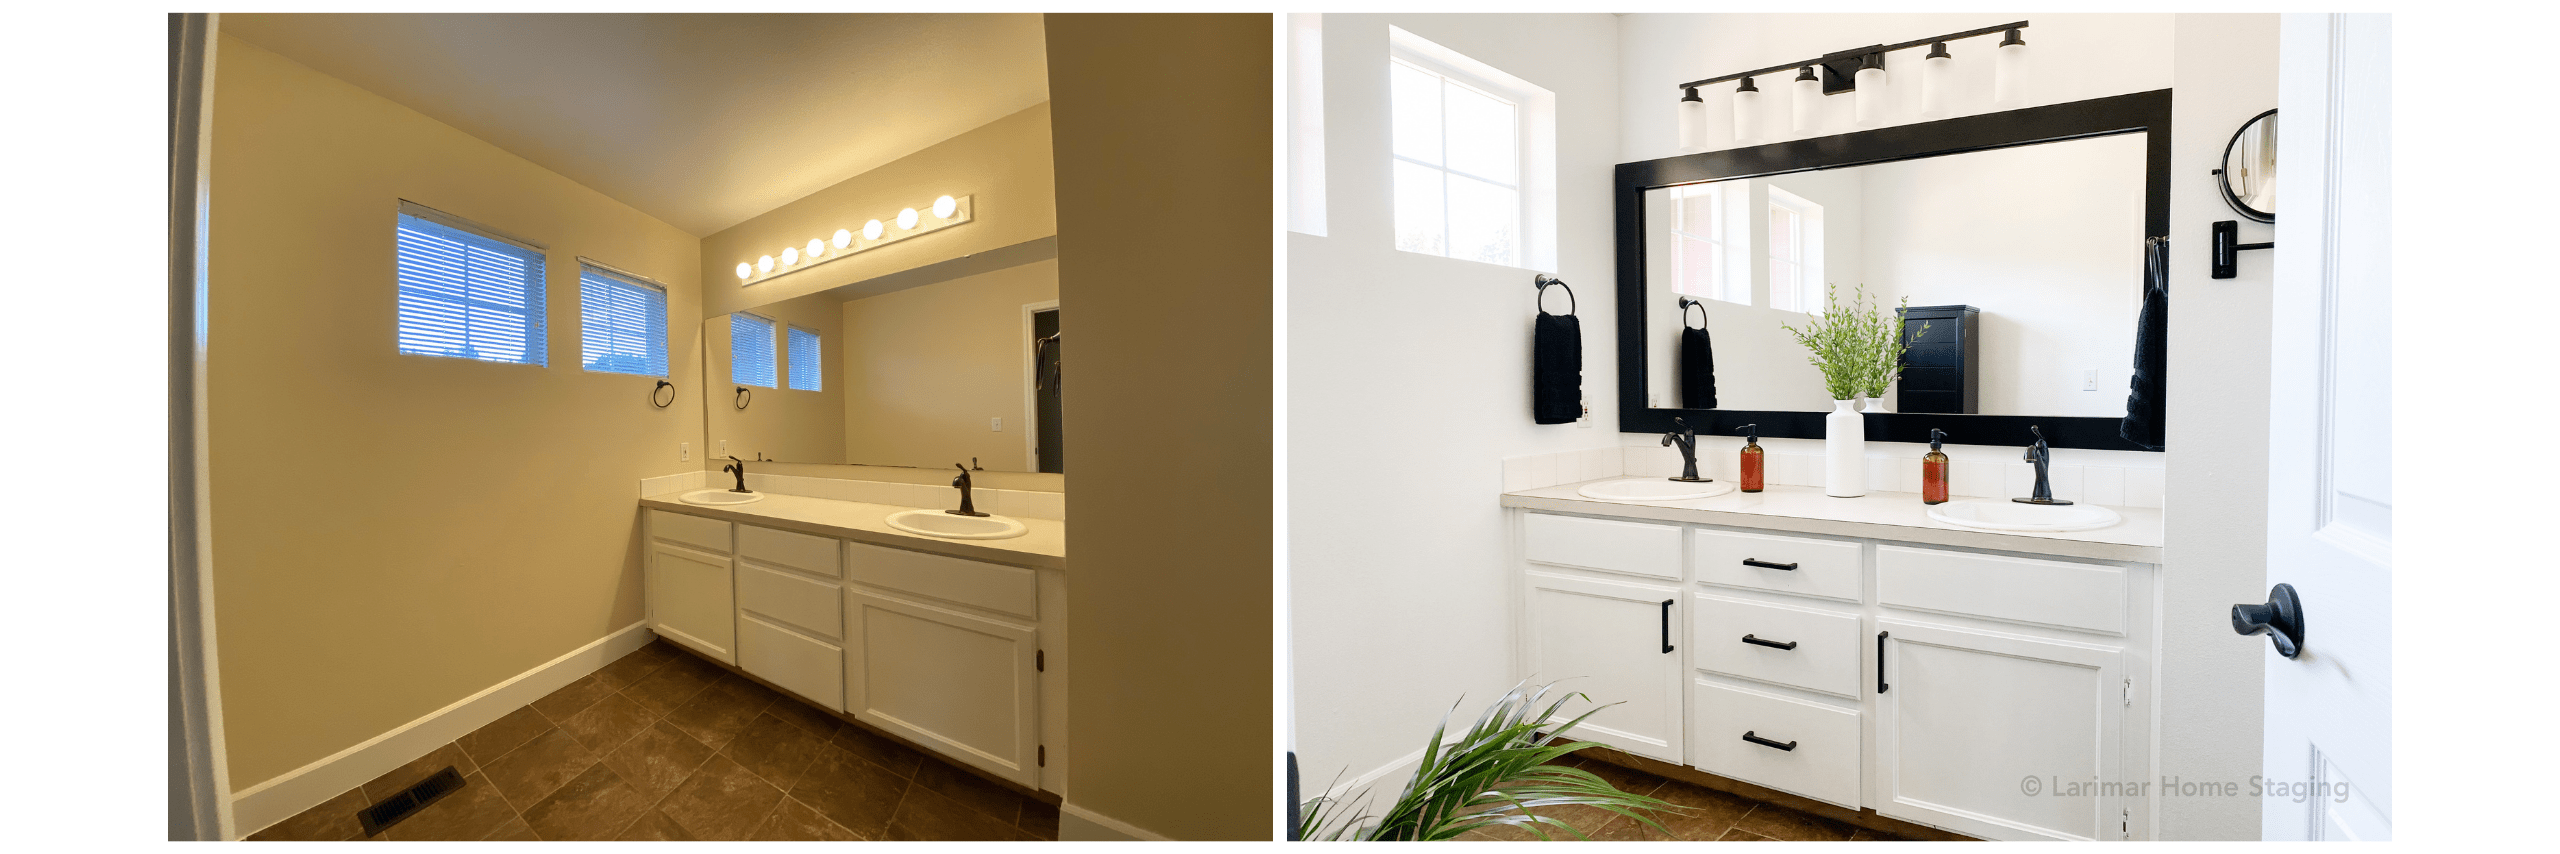 Bathroom Before and After Home Staging 